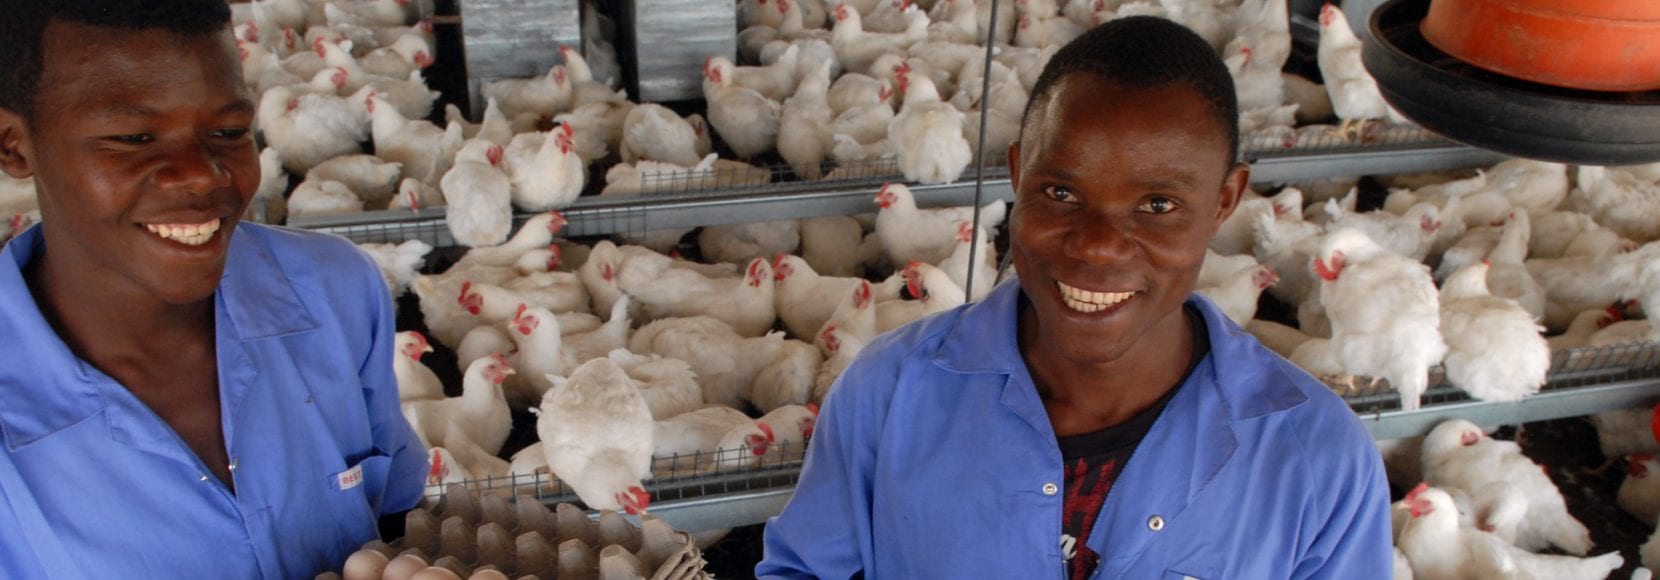 Mozambique poultry industry workers